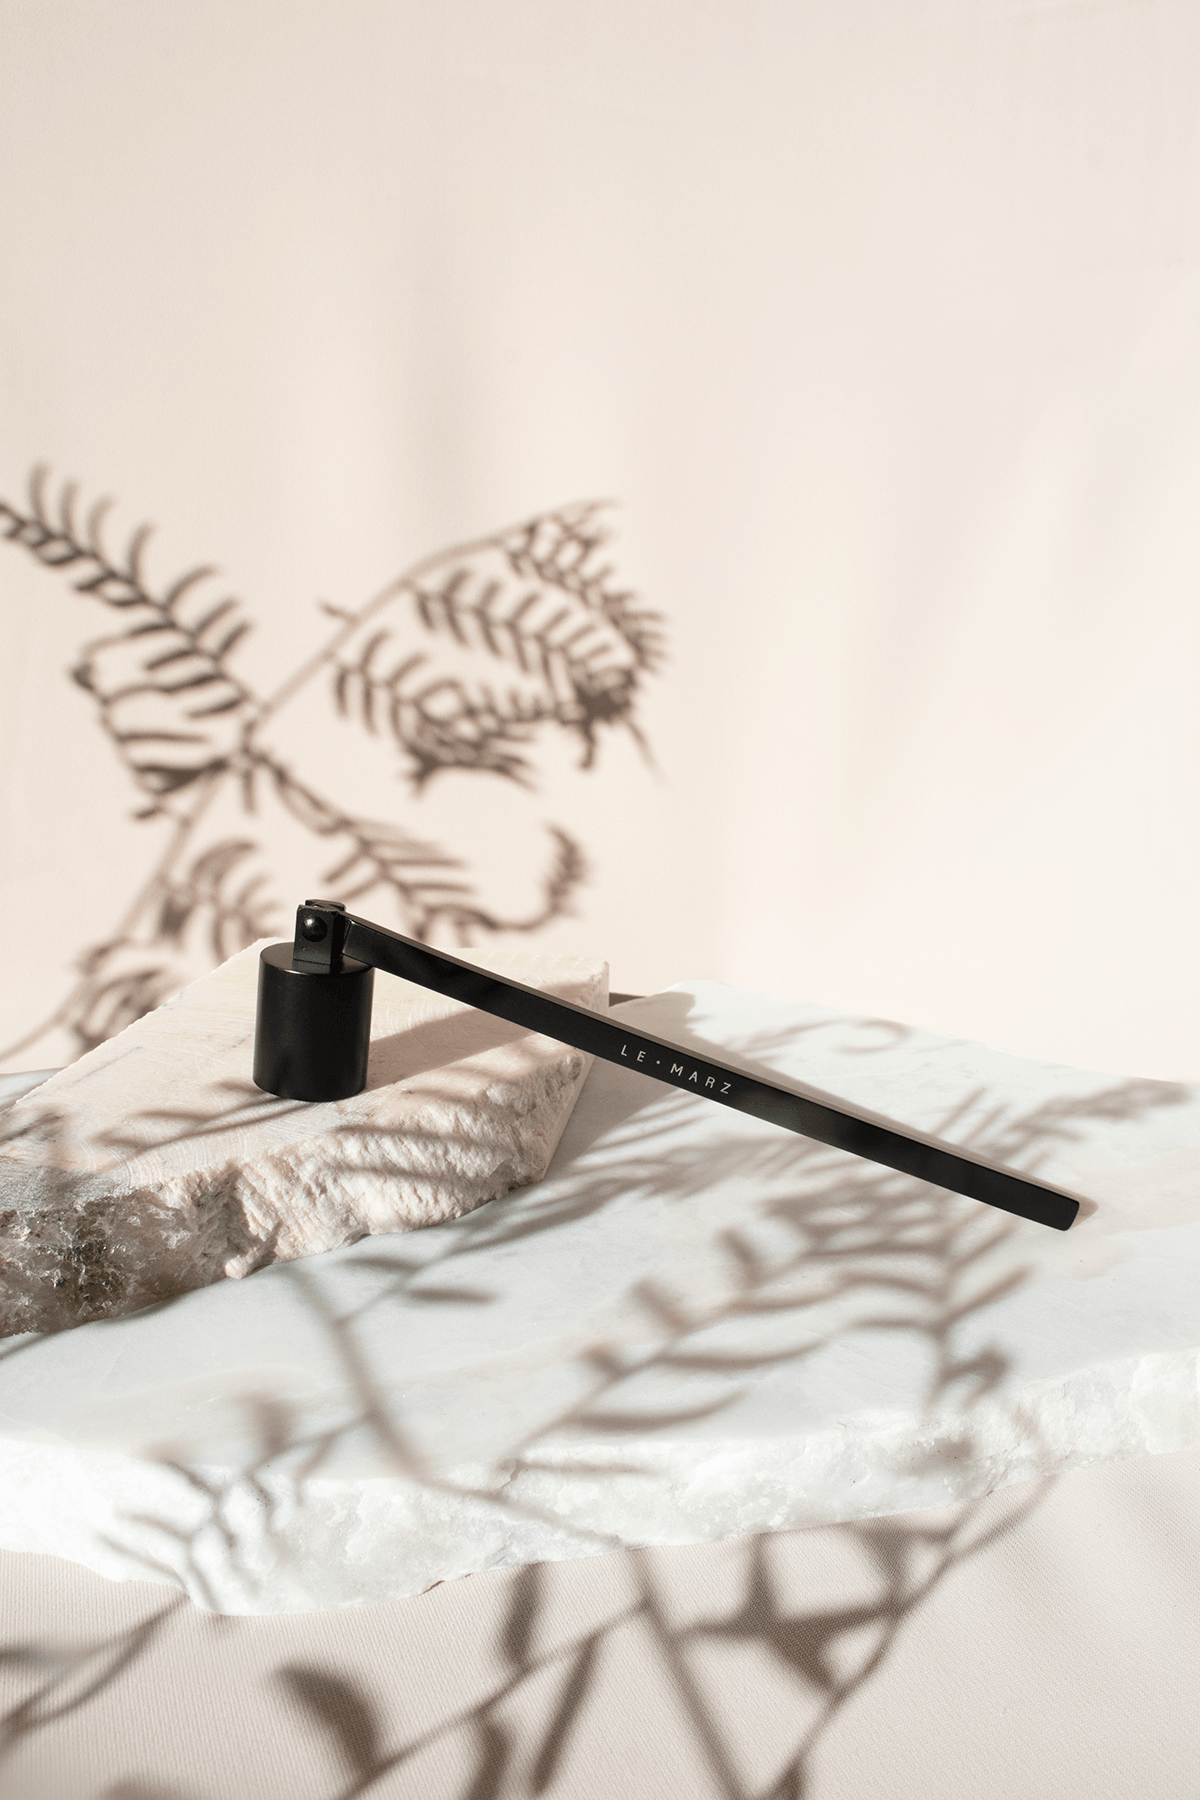 candle care accessory, candle accessory, black candle snuffer, candle care